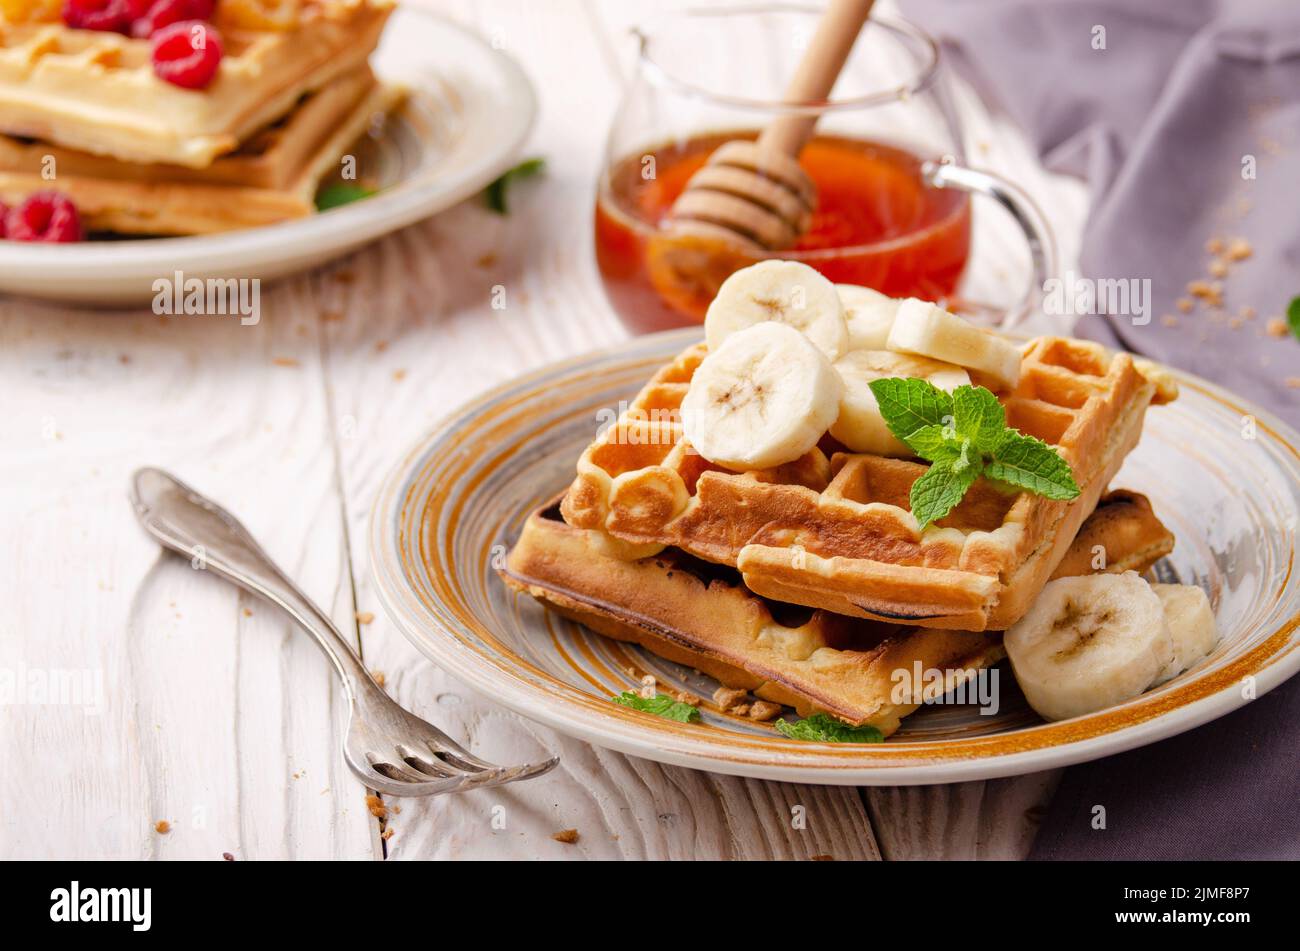 Belgian waffles served with banana and mint leaf on white wooden kitchen table with syrup aside Stock Photo